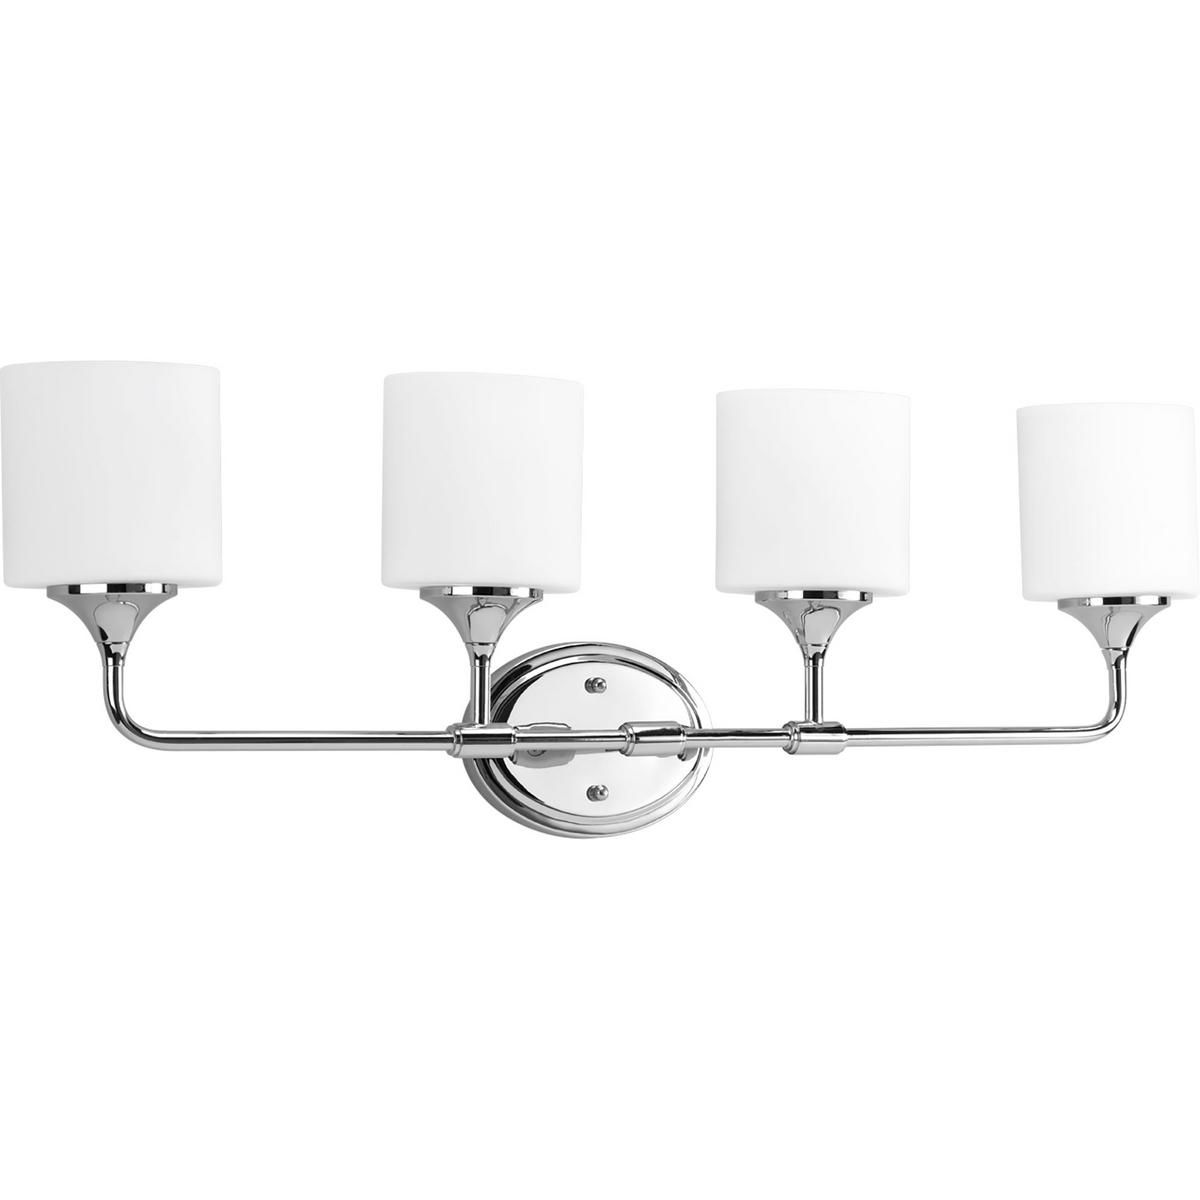 Hubbell P2804-15 With a youthful, yet timeless flair, the Lynzie Collection brightens your day with its simplicity. This four-light bath fixture with etched, white, oval shaped glass shades held upright by delicate classic Chrome finished arms portray the simple styling. 